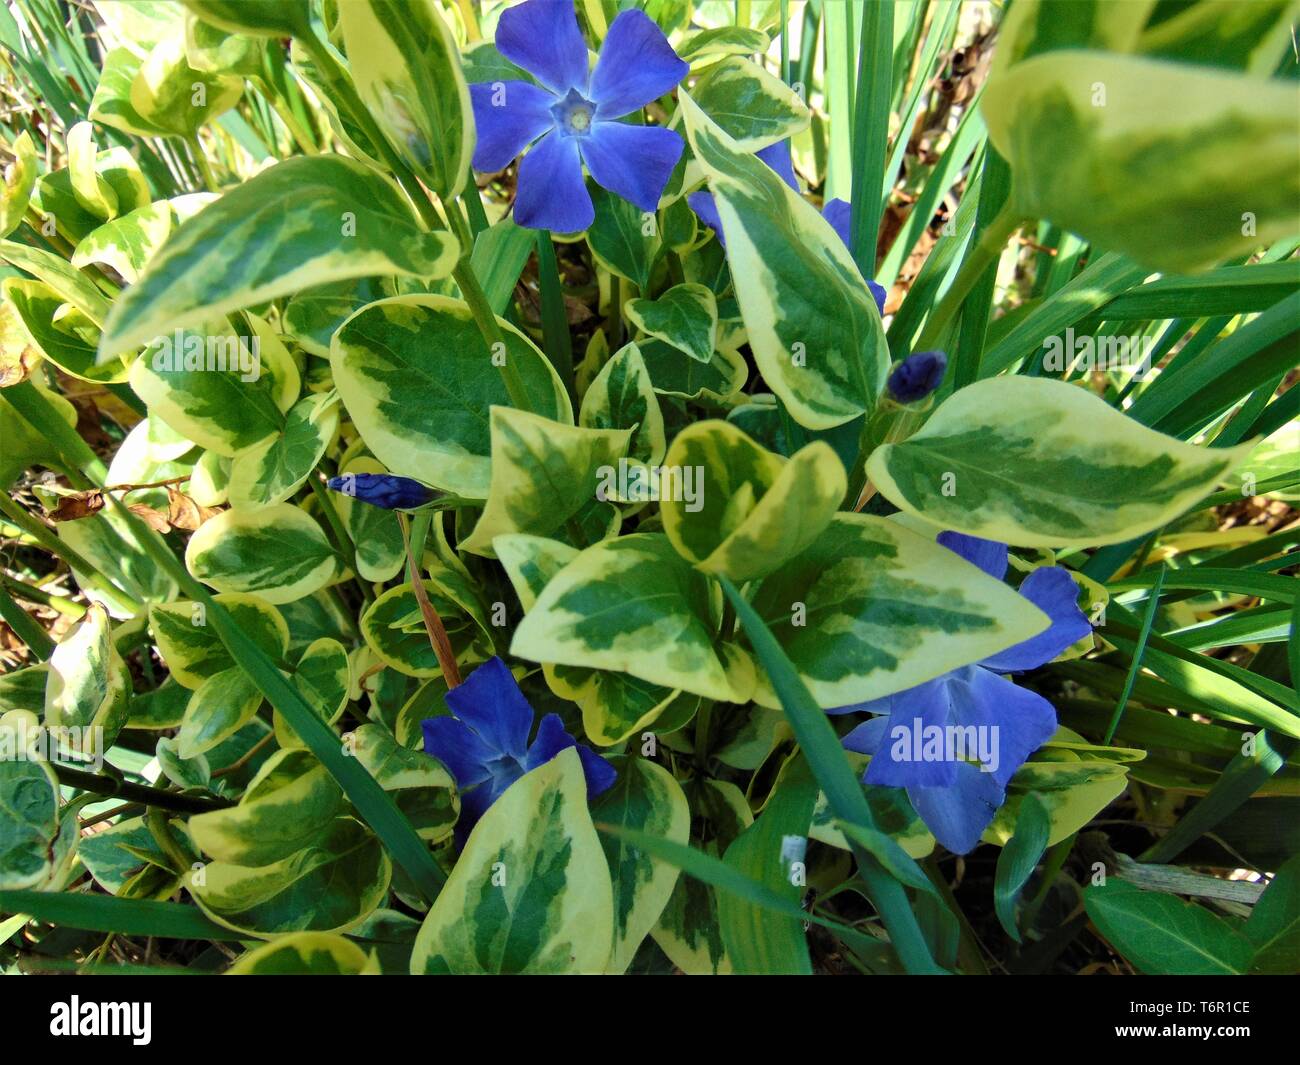 Vinca major Variegata - bigleaf periwinkle with beautiful deep blue flowers and white marked leaves Stock Photo